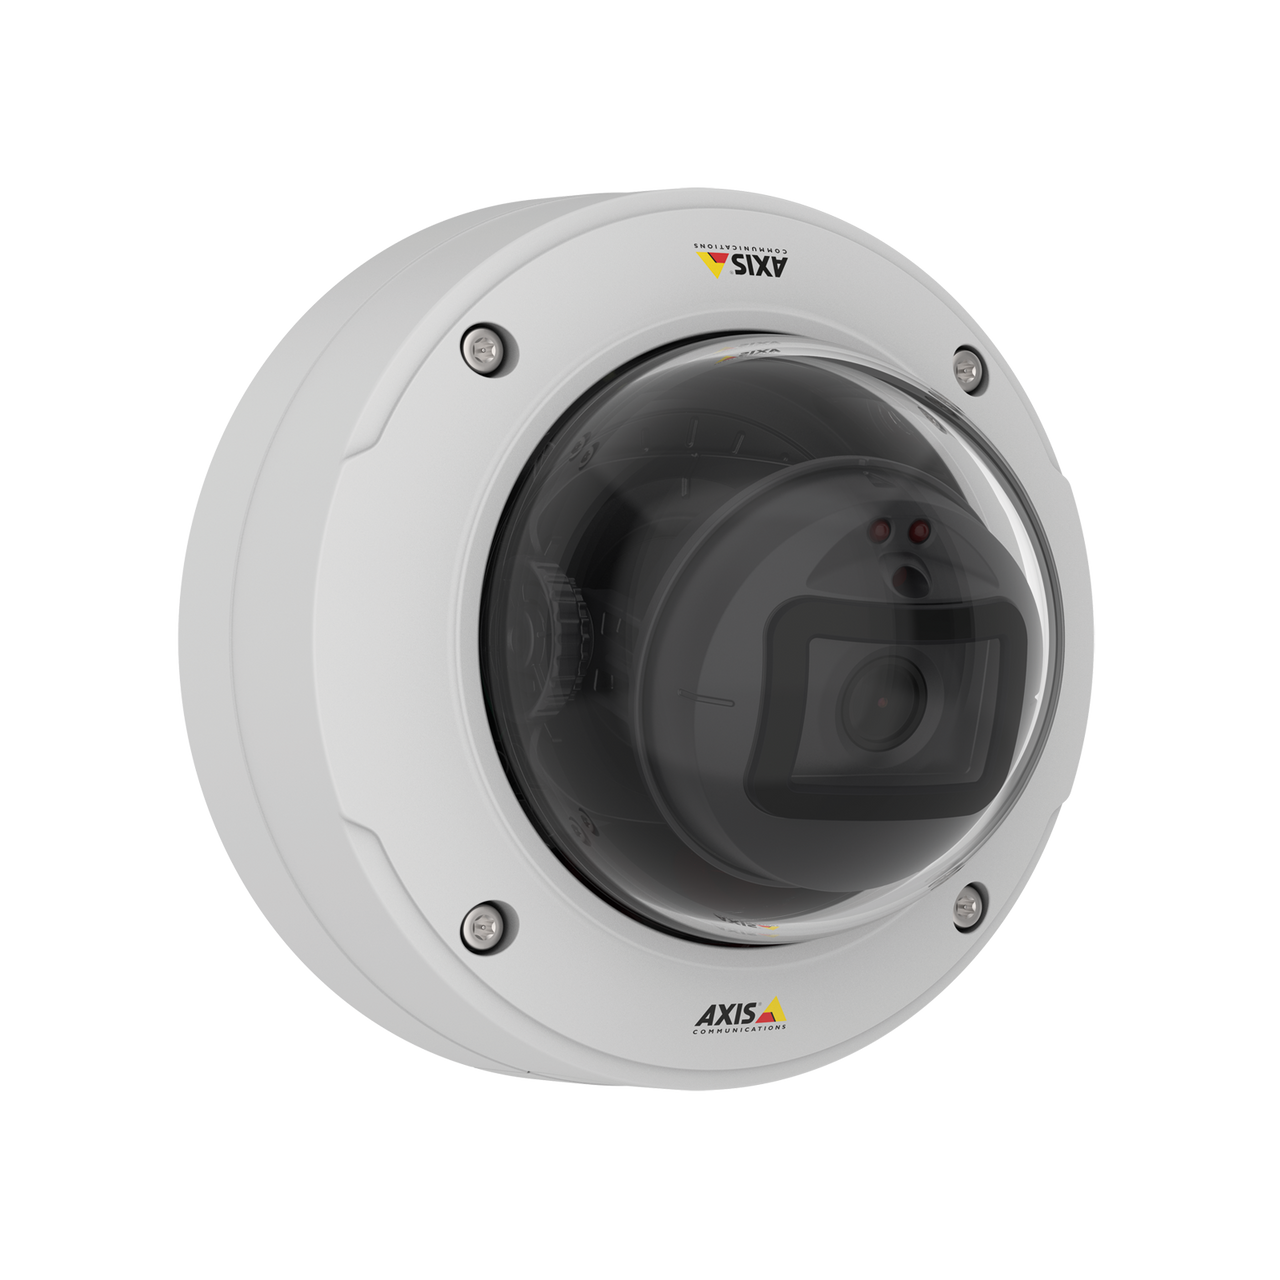 AXIS M3205-LVE Robust wide-angle surveillance in 1080p with IR